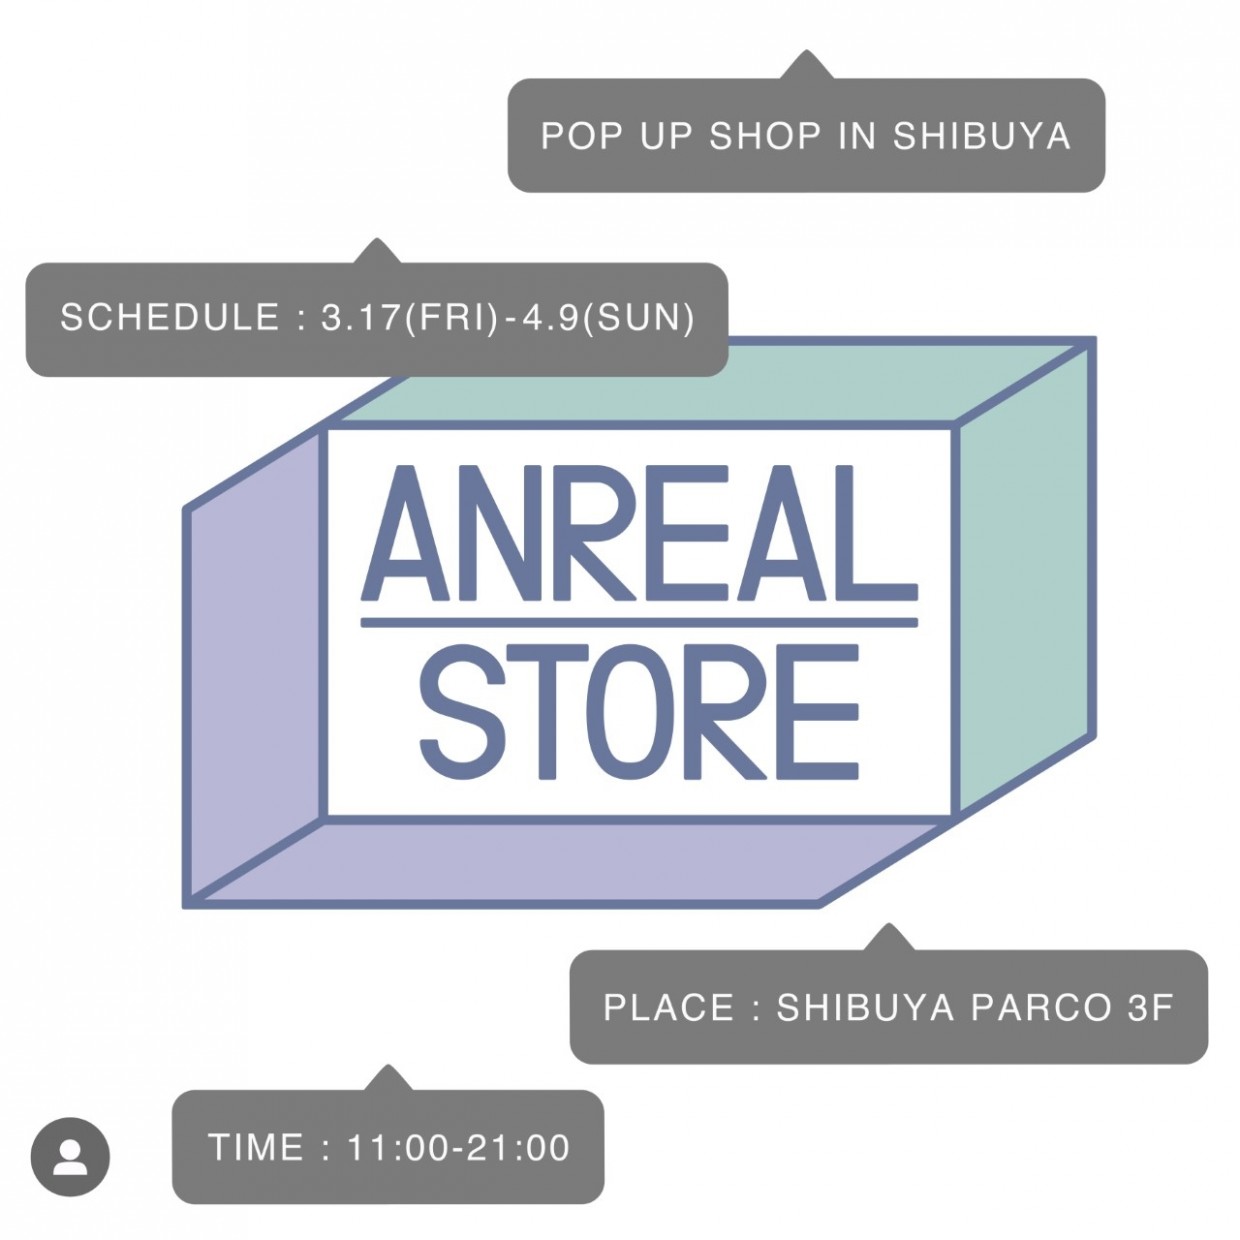 ANREAL STORE POP UP STORE